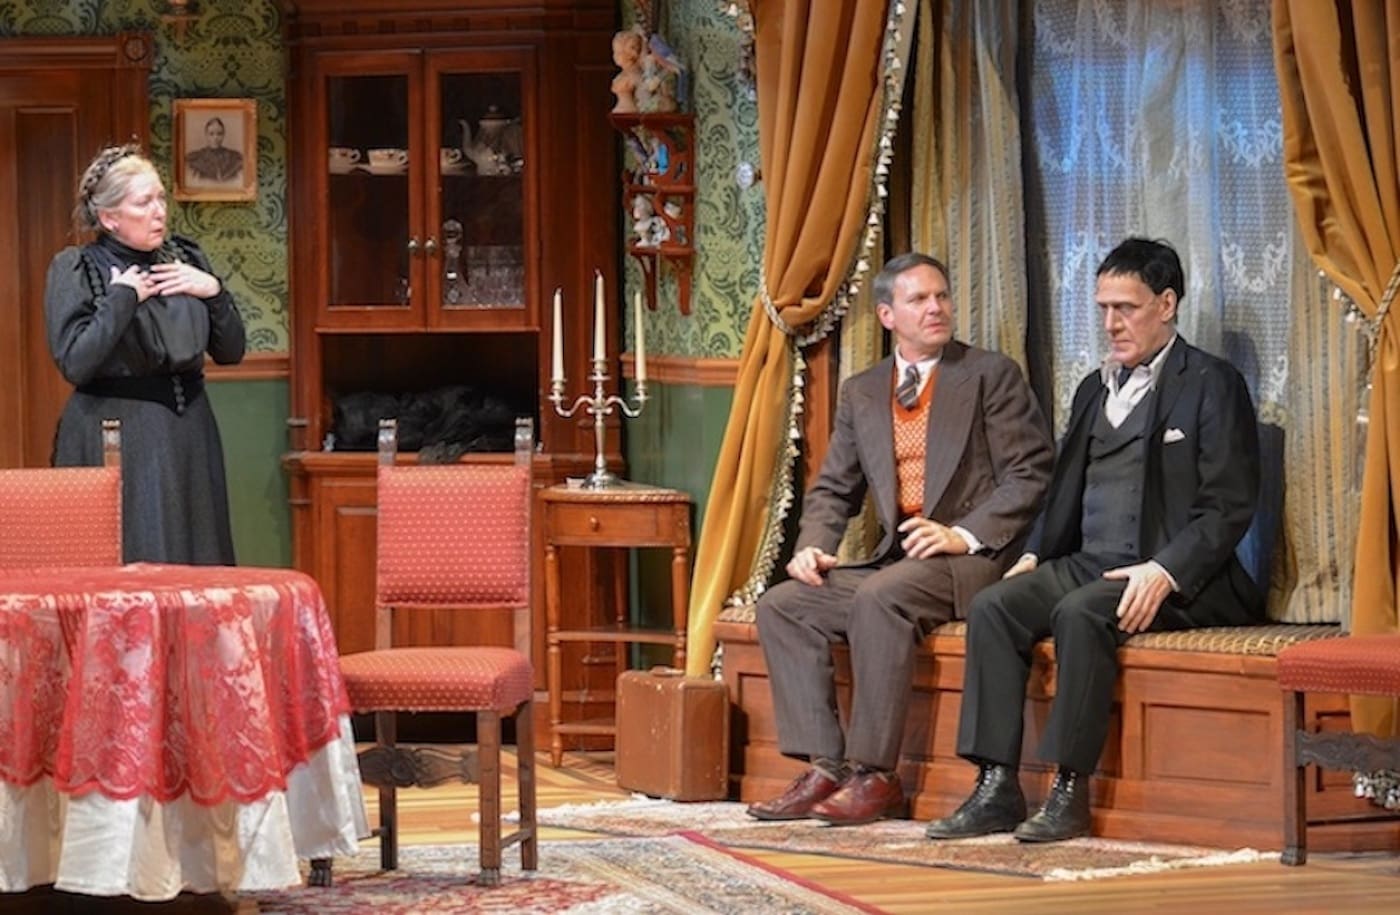 Featured image for “UD REP stages ‘Arsenic and Old Lace’”